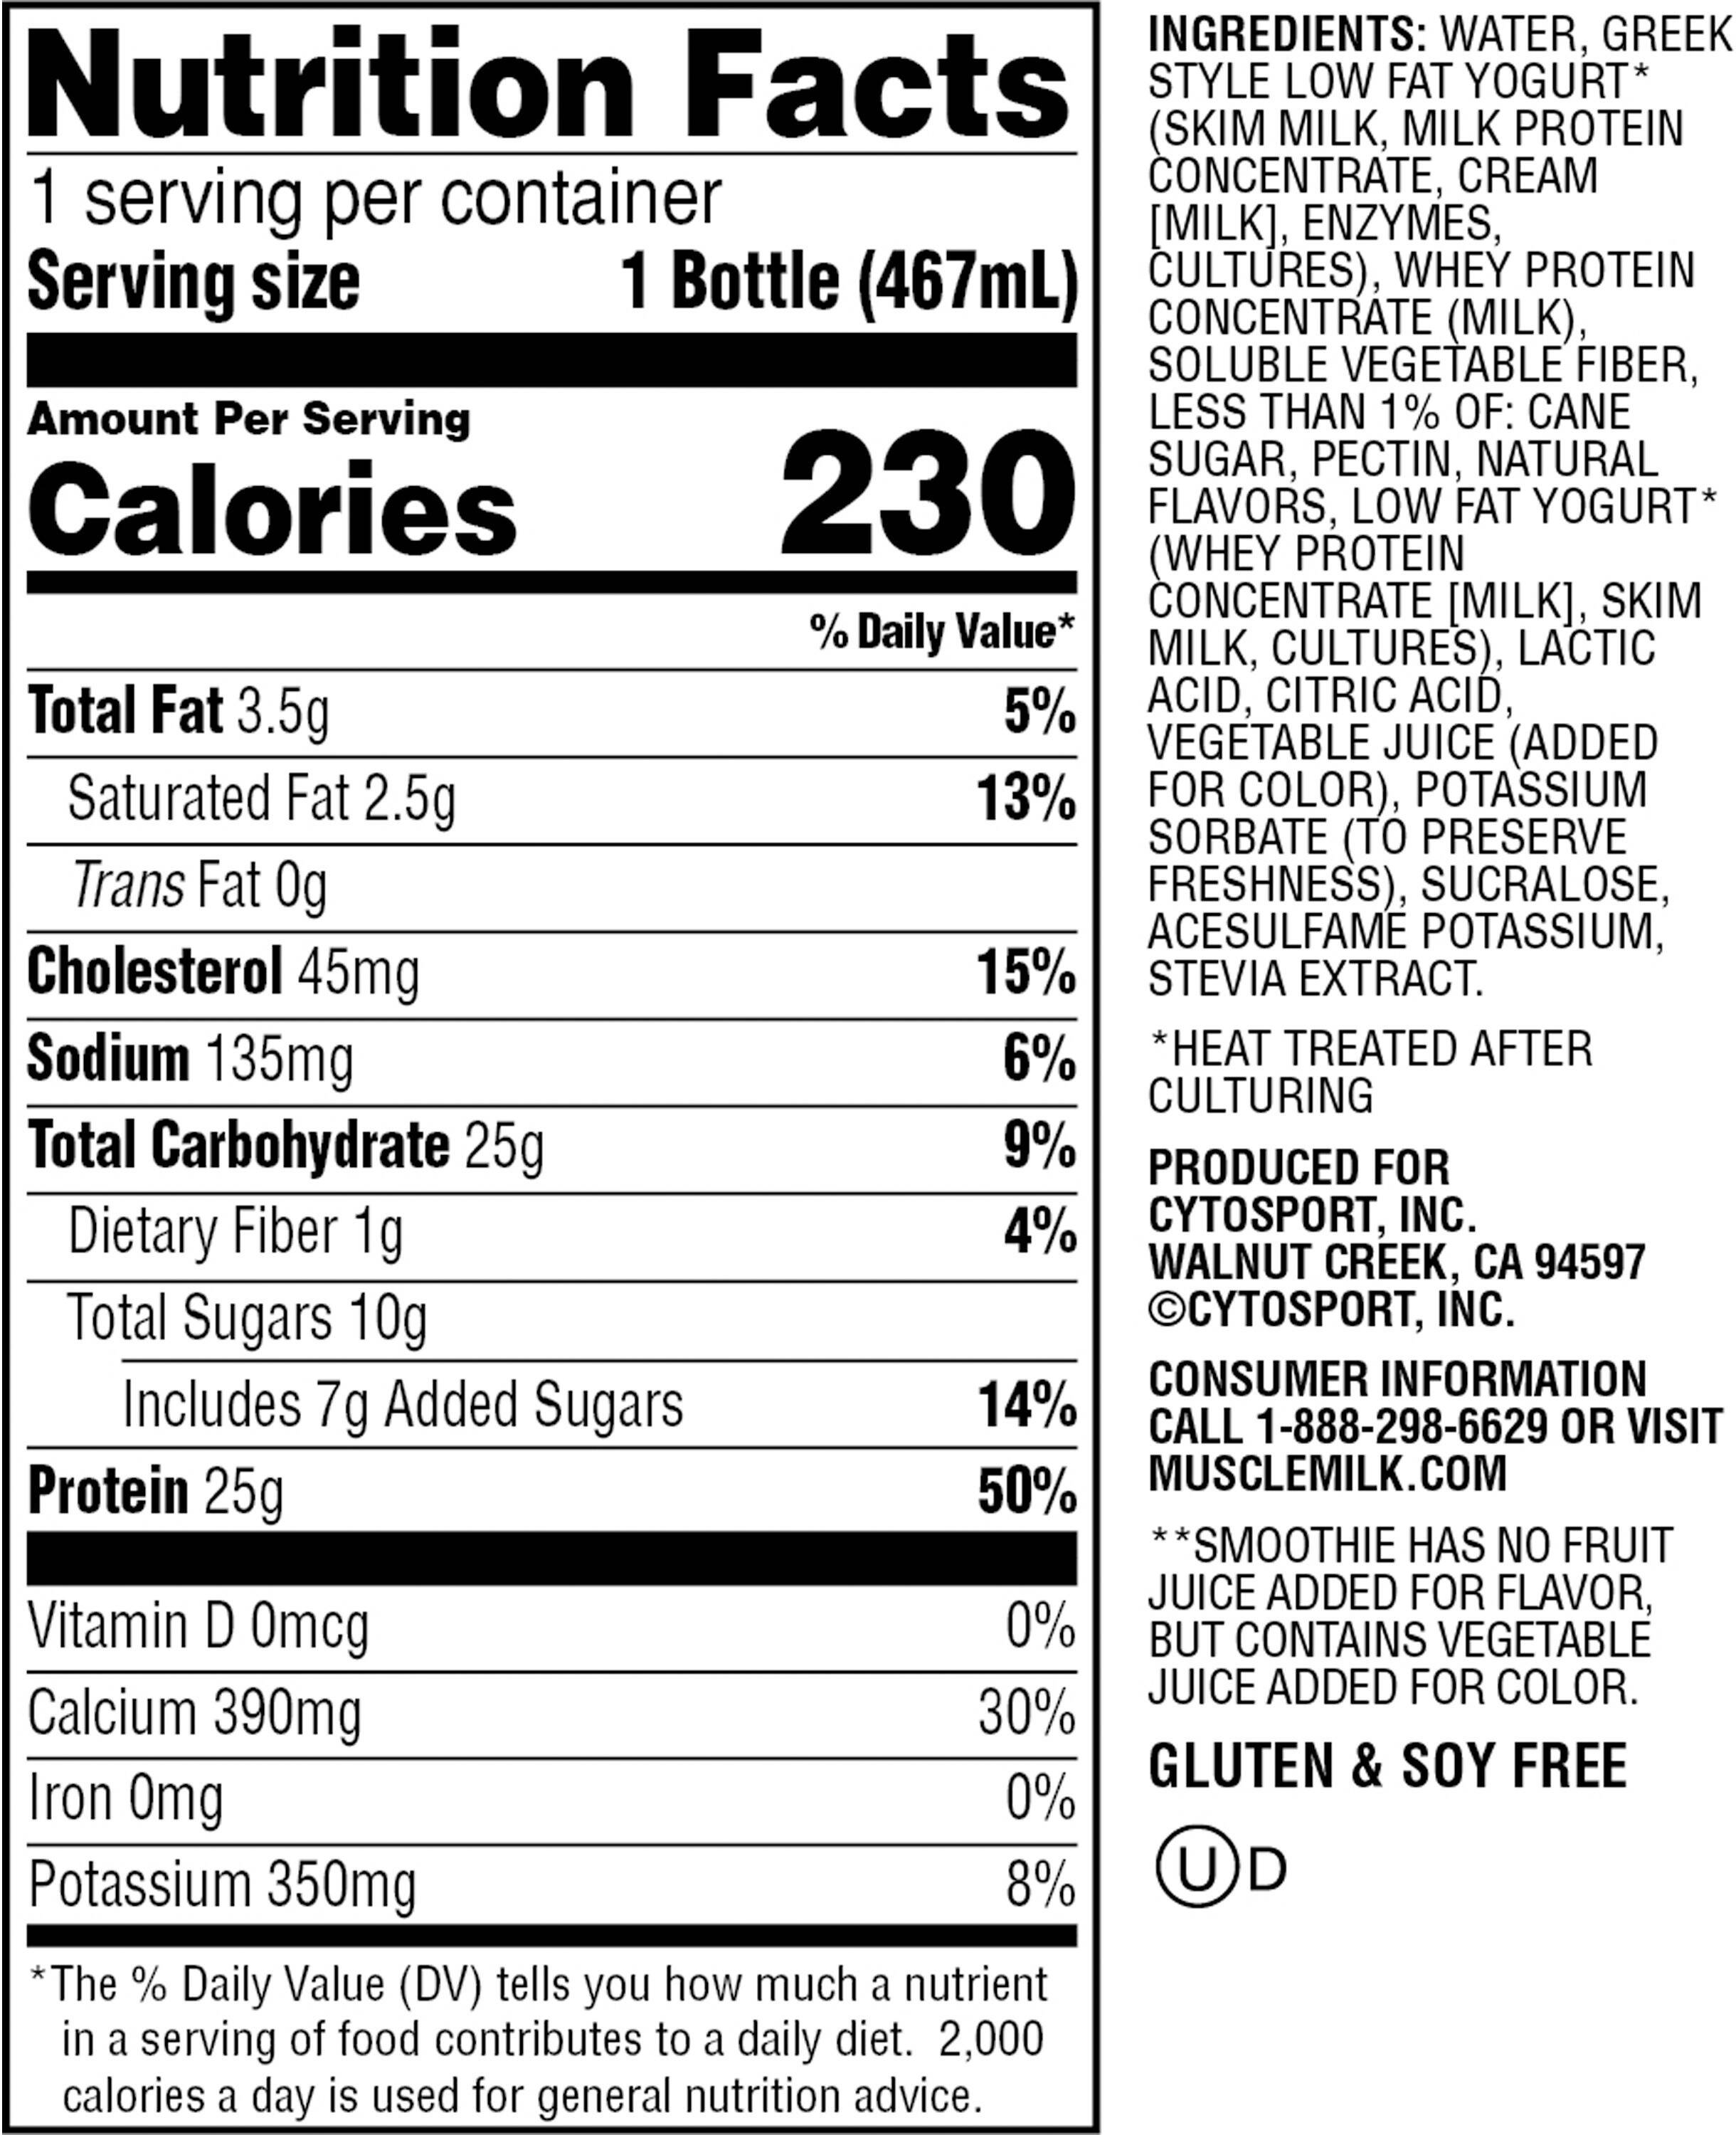 Image describing nutrition information for product Muscle Milk Smoothie Strawberry Banana